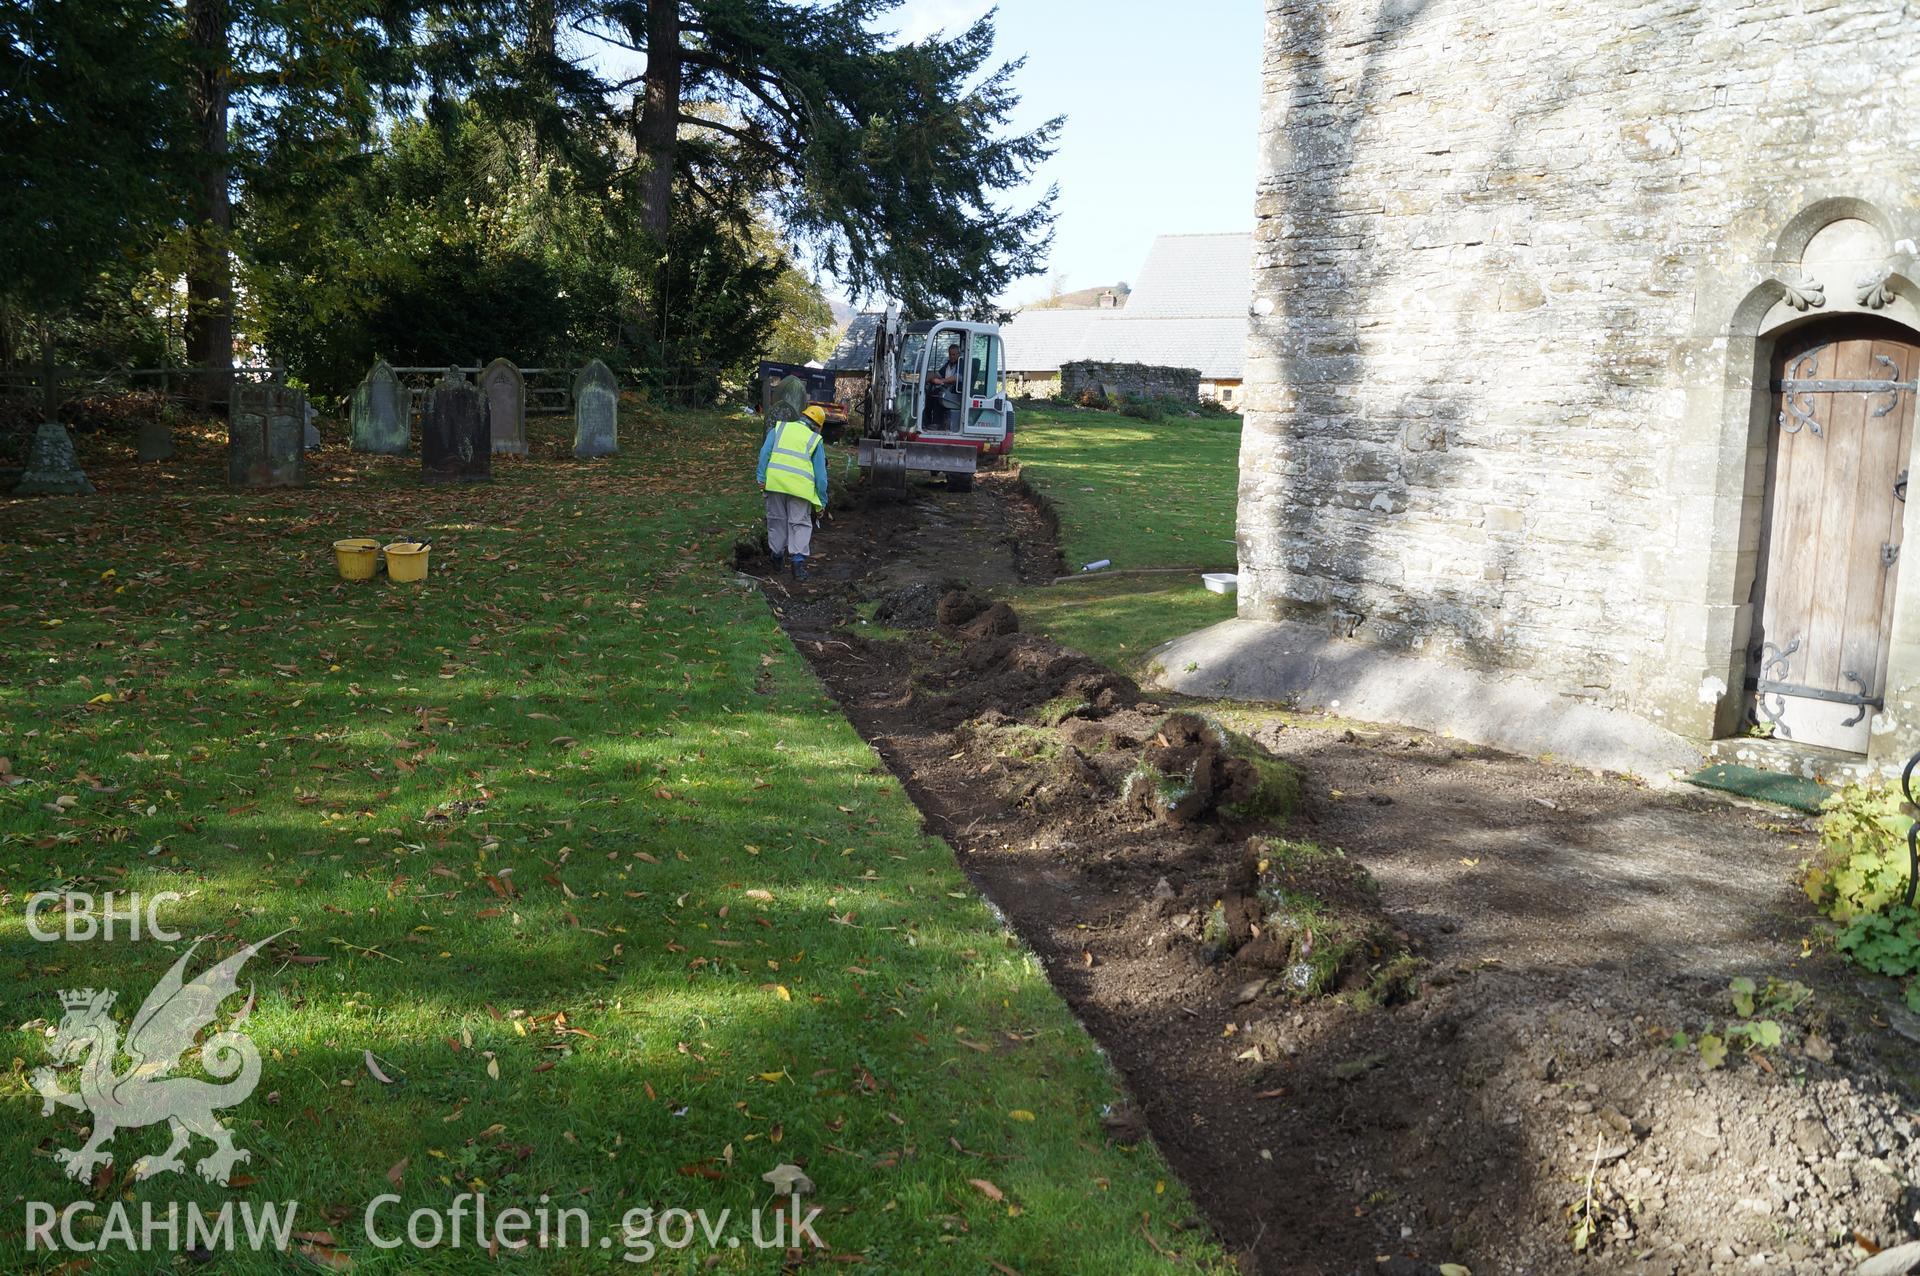 View 'looking west northwest towards where only the turf was removed from the area of path in front of the church, no archaeologically significant contexts observed.' Photograph and description by Jenny Hall and Paul Sambrook of Trysor, 16th October 2017.